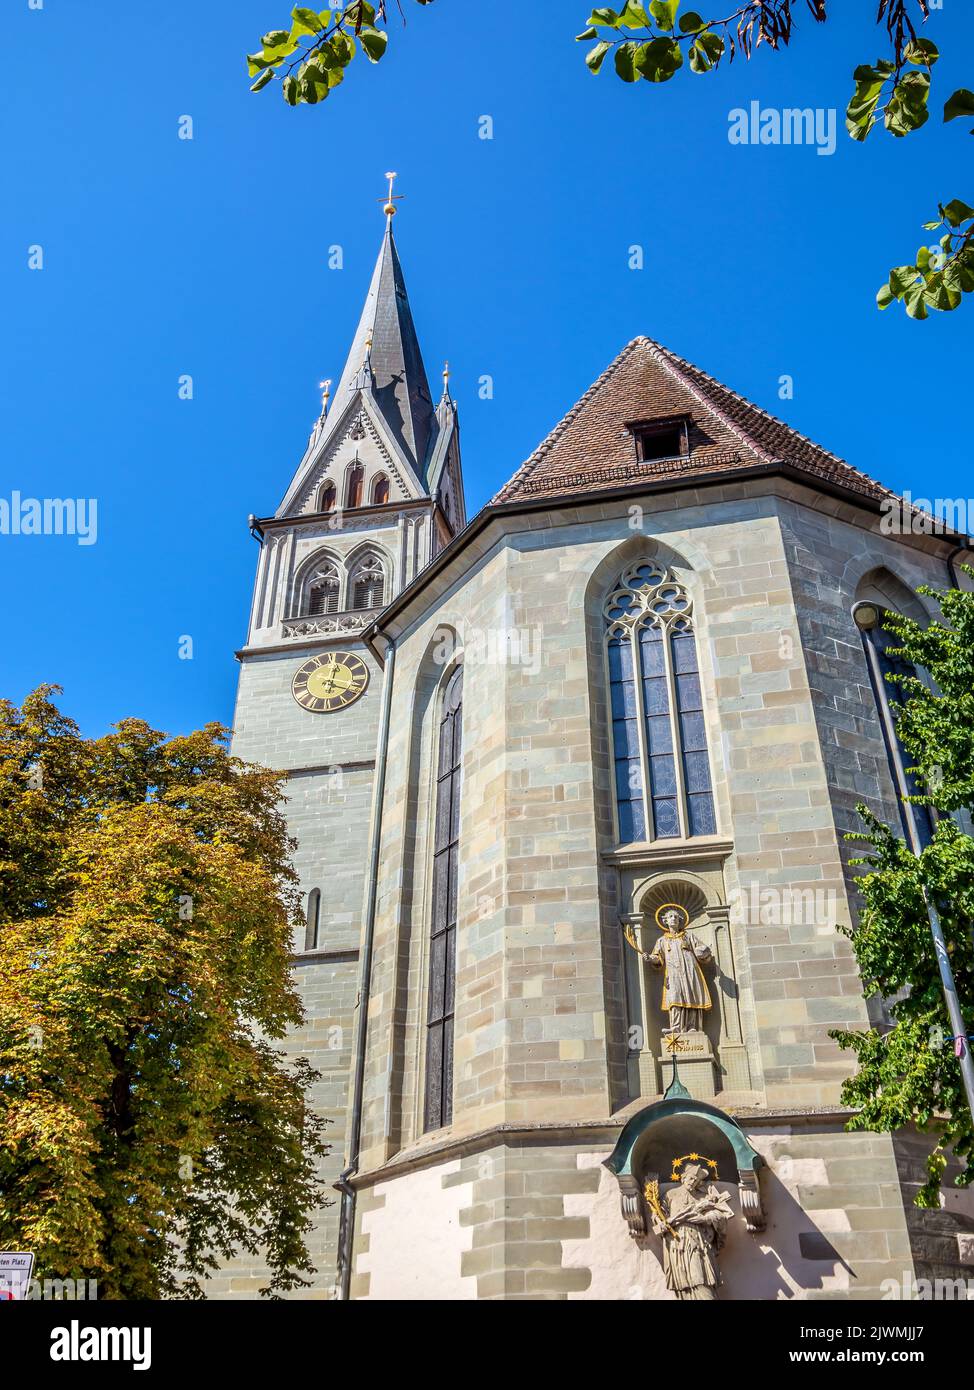 CONSTANCE : Church towers of Constance Stock Photo